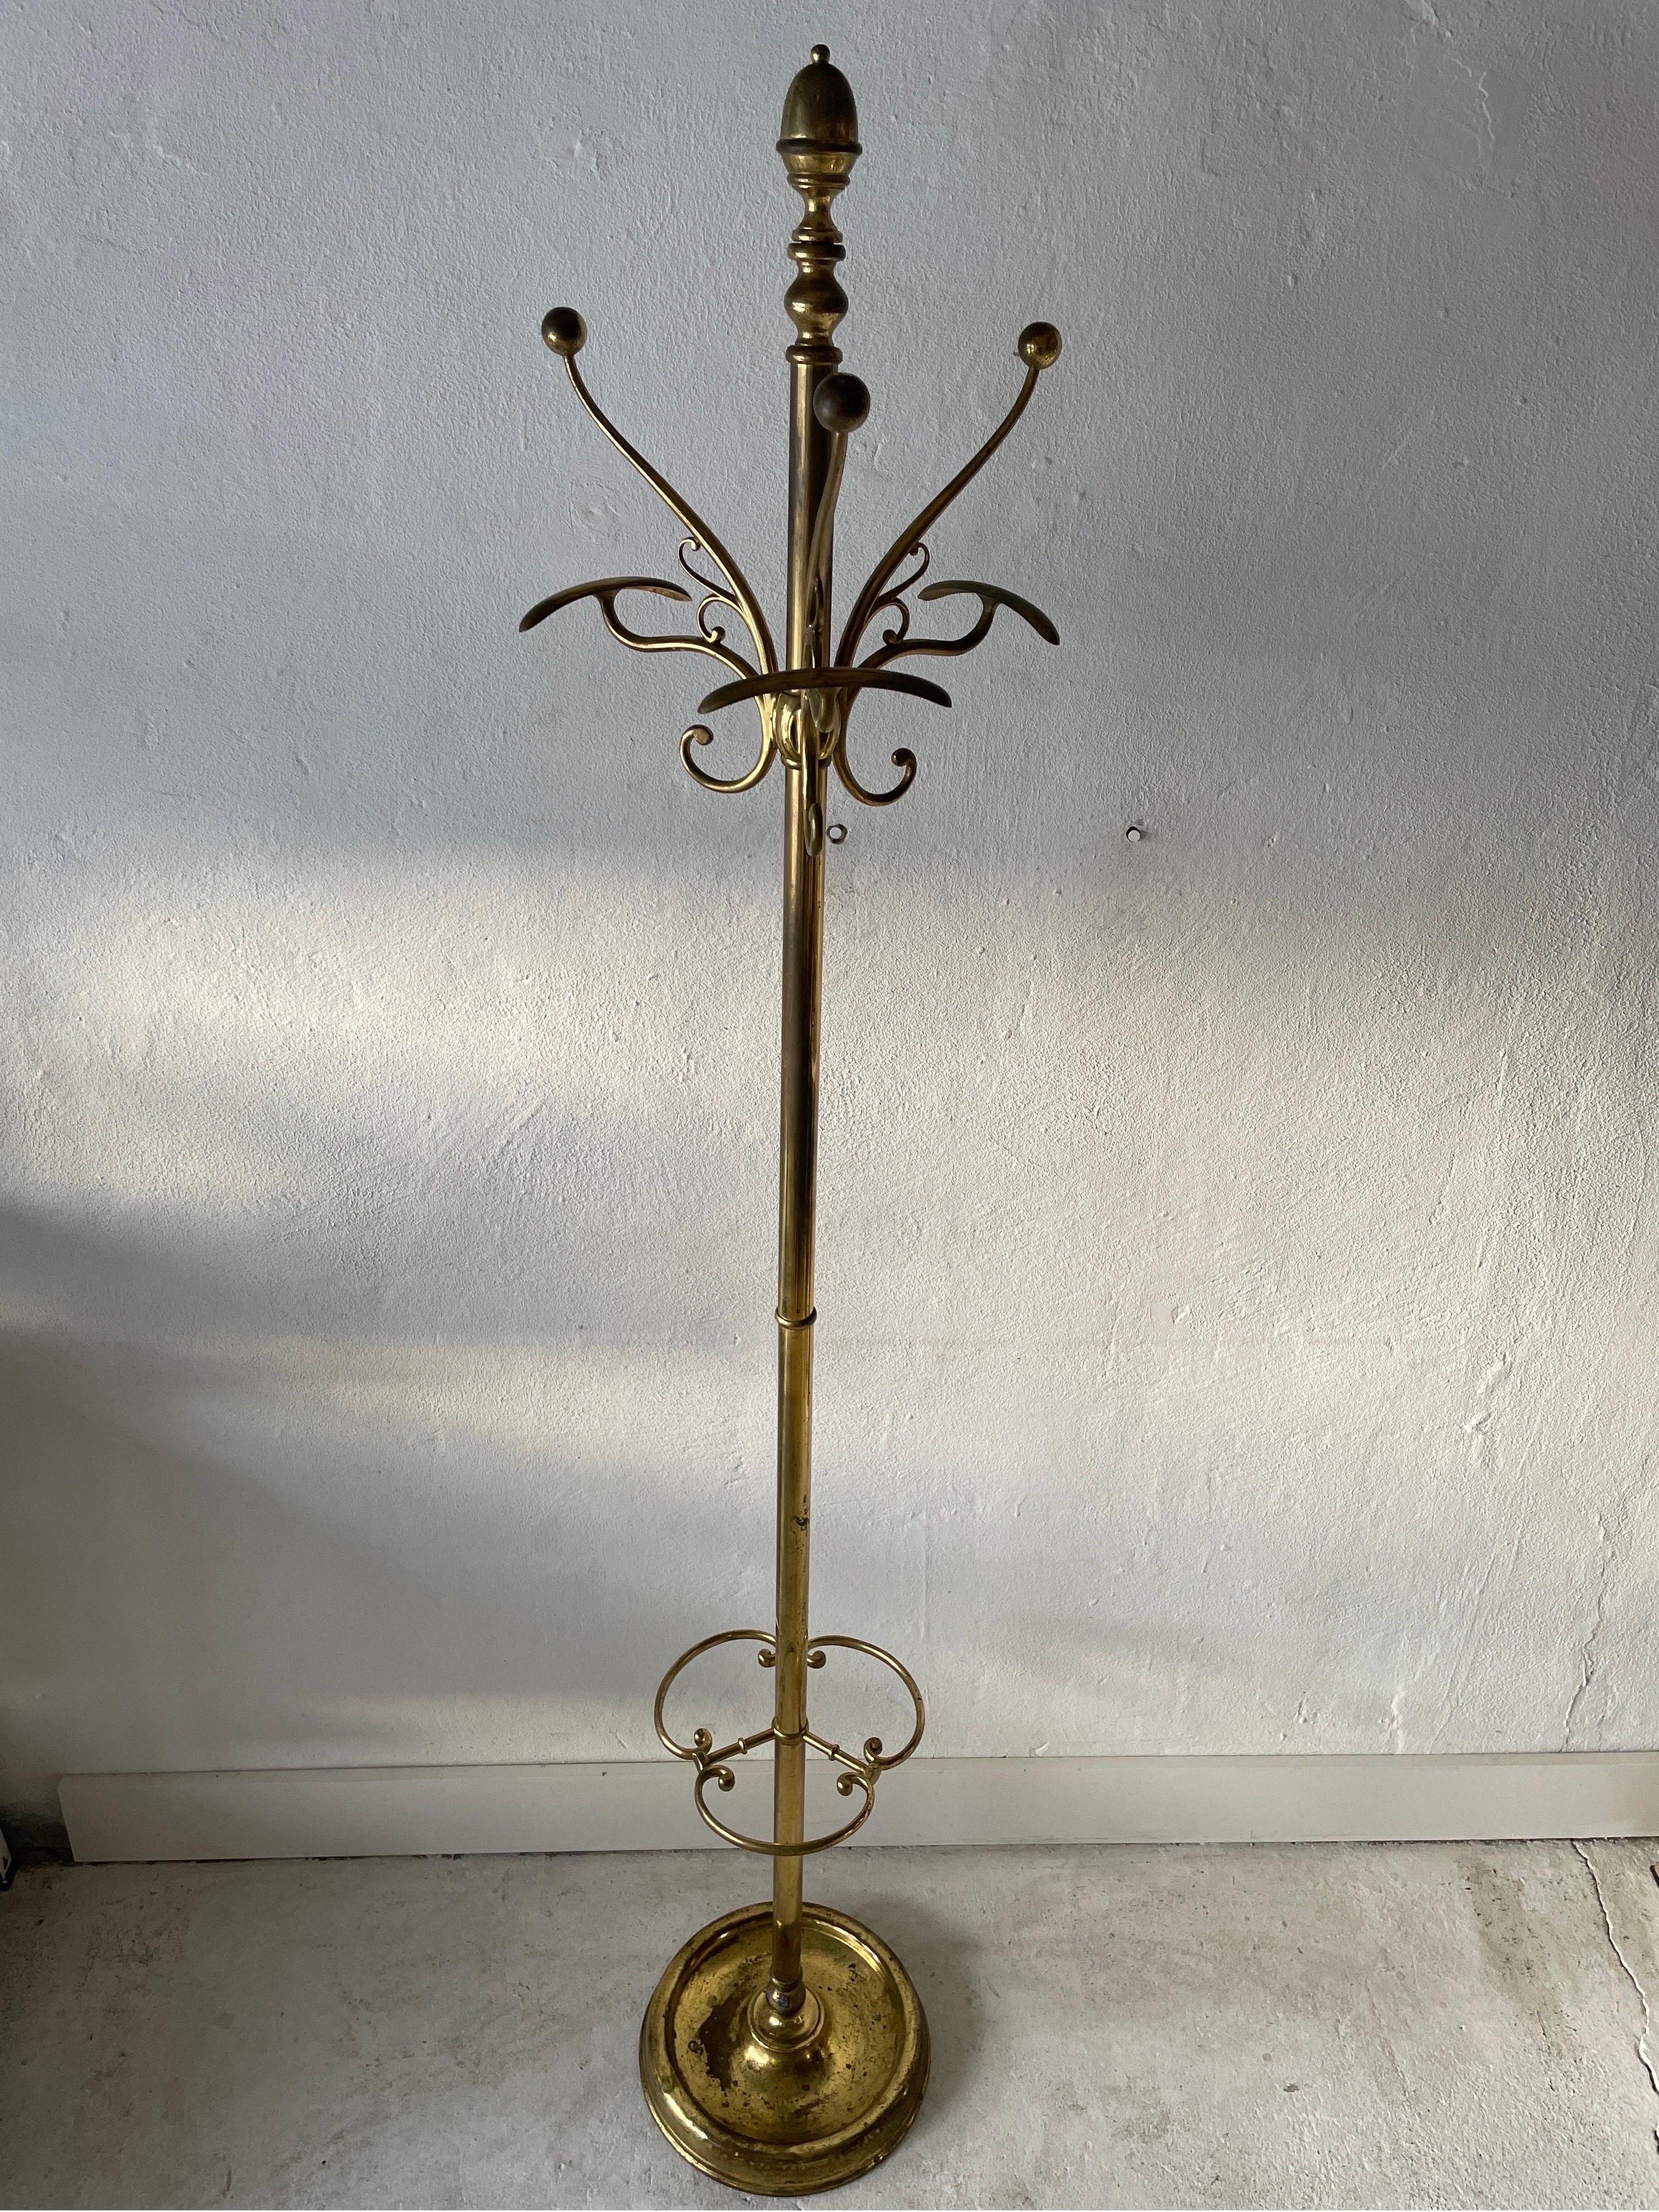 Full Brass Standing Coat Stand with Umbrella Holders, 1960s, Italy
Its very heavy 

Measurements: 
Height: 186 cm
Hanger height, width and depth: 30 cm , 16 cm and 20 cm
Base diameter: 31 cm
Umbrella holder diameter: 25 cm





.